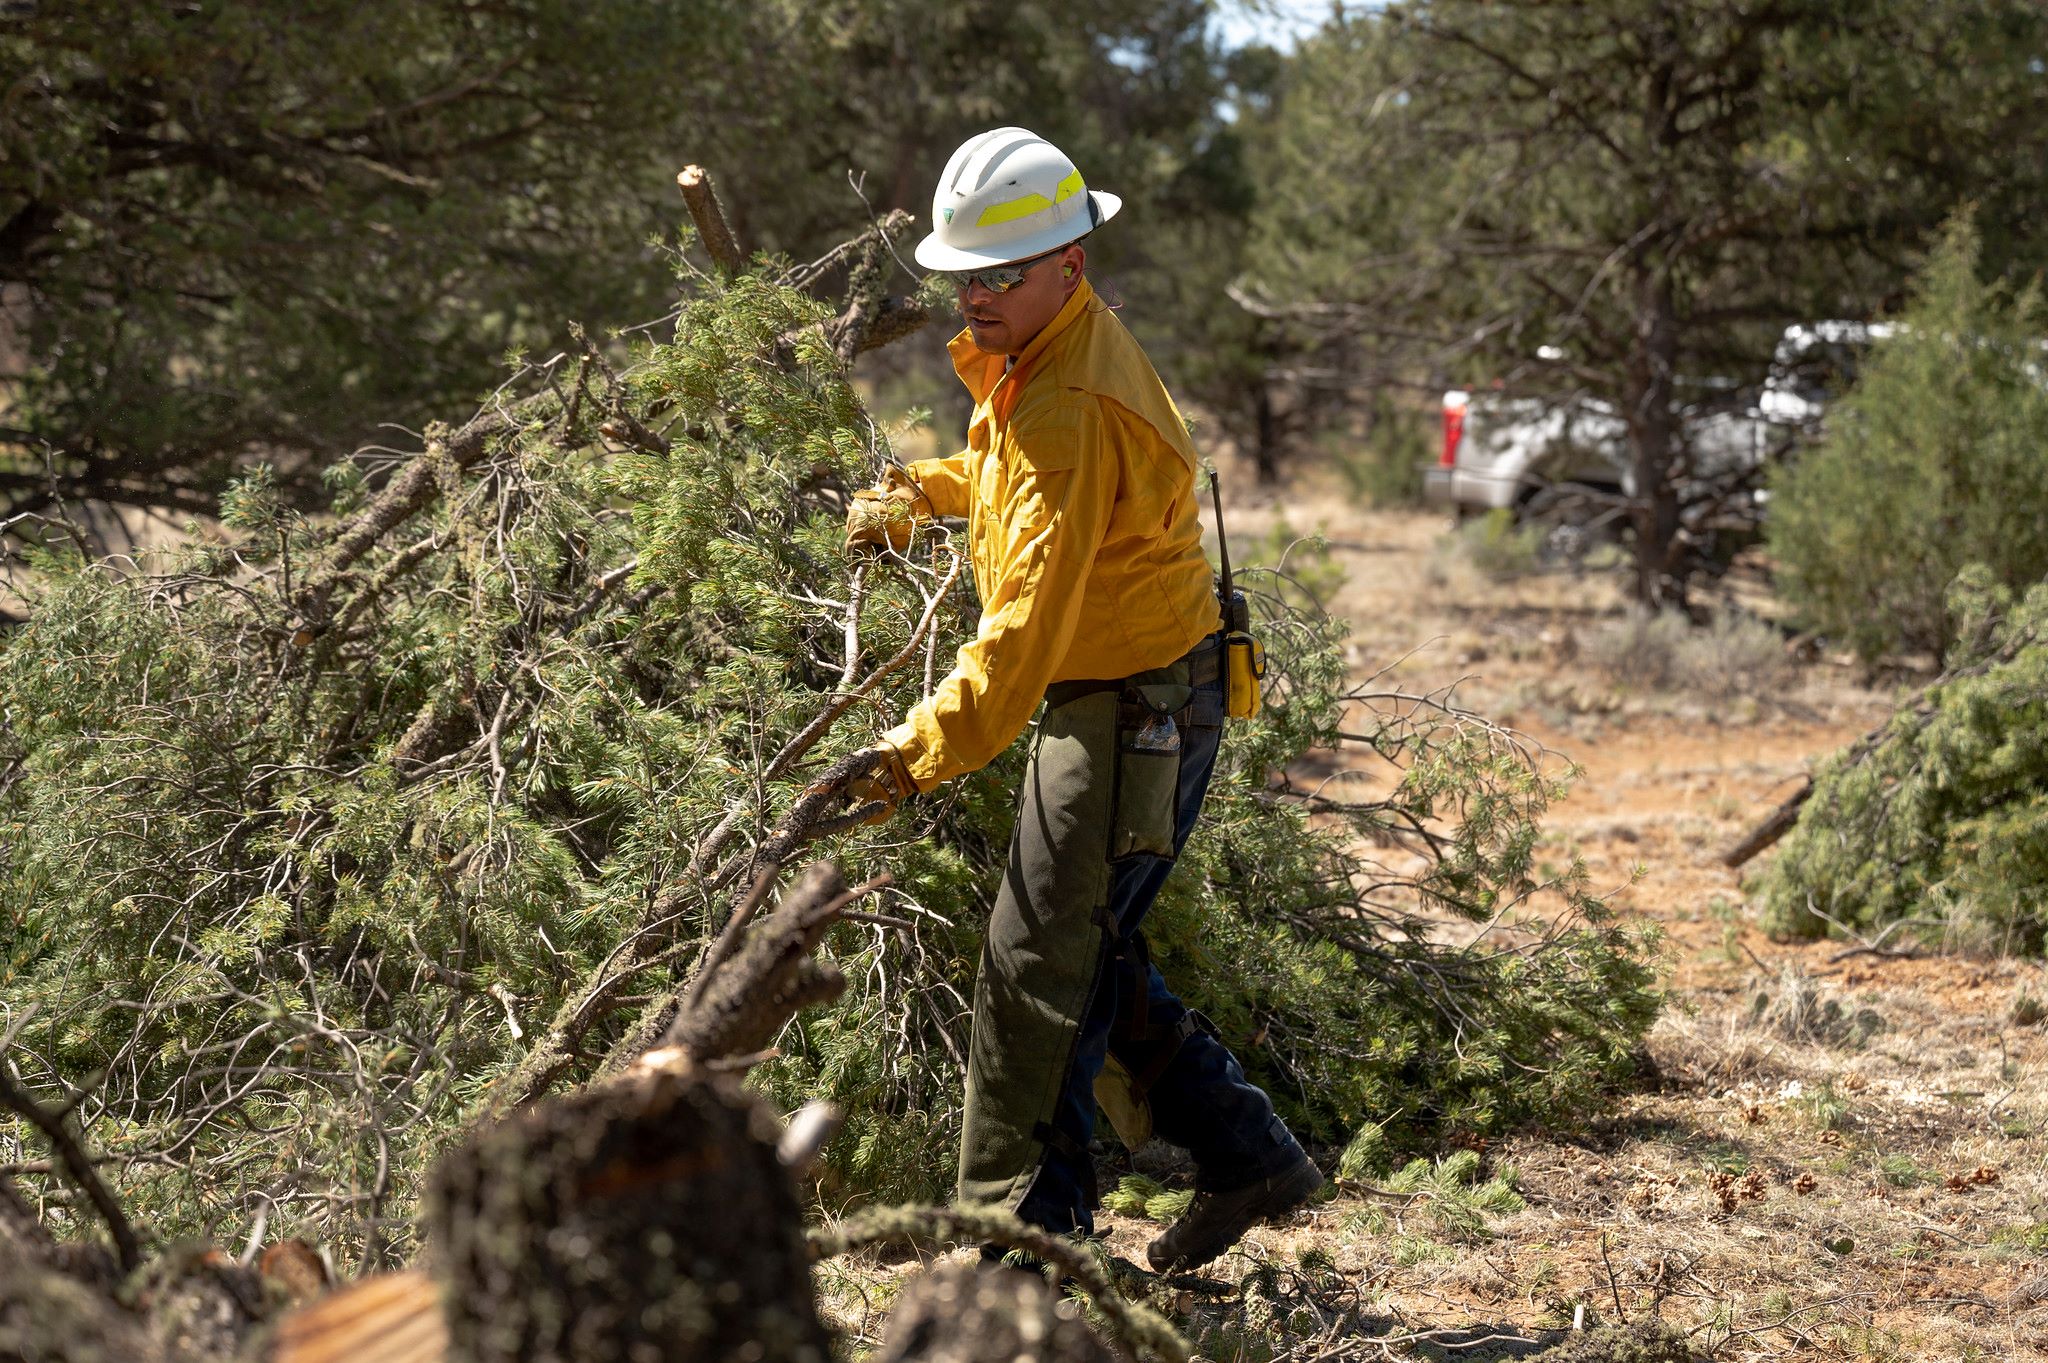 A wildland fire employee moves recently cut tree branches into a pile during a fuels management project.